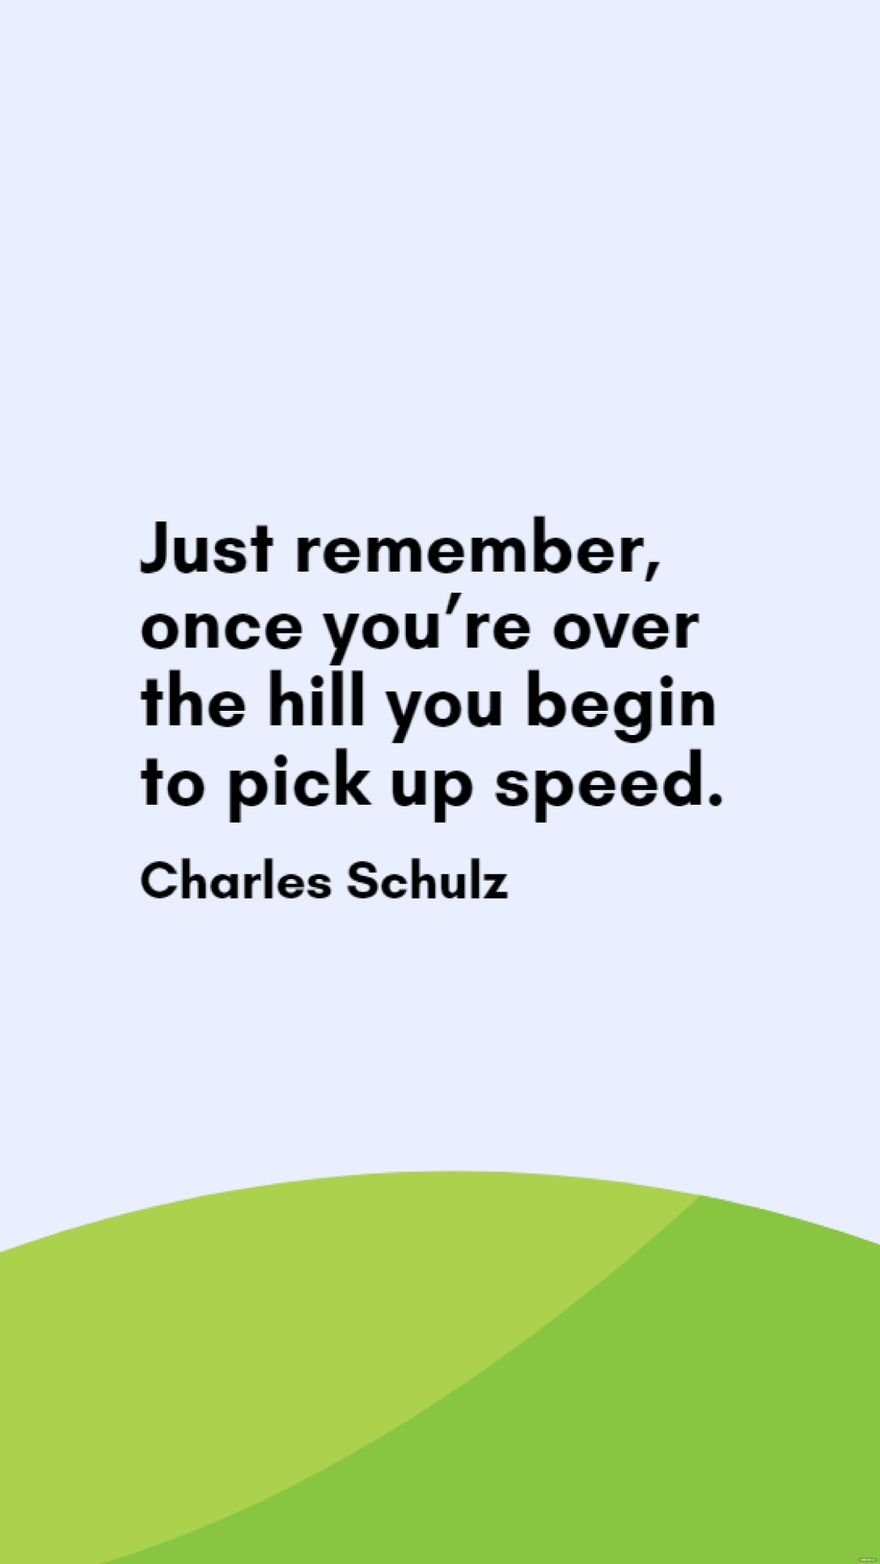 Free Charles Schulz - Just remember, once you’re over the hill you begin to pick up speed. in JPG